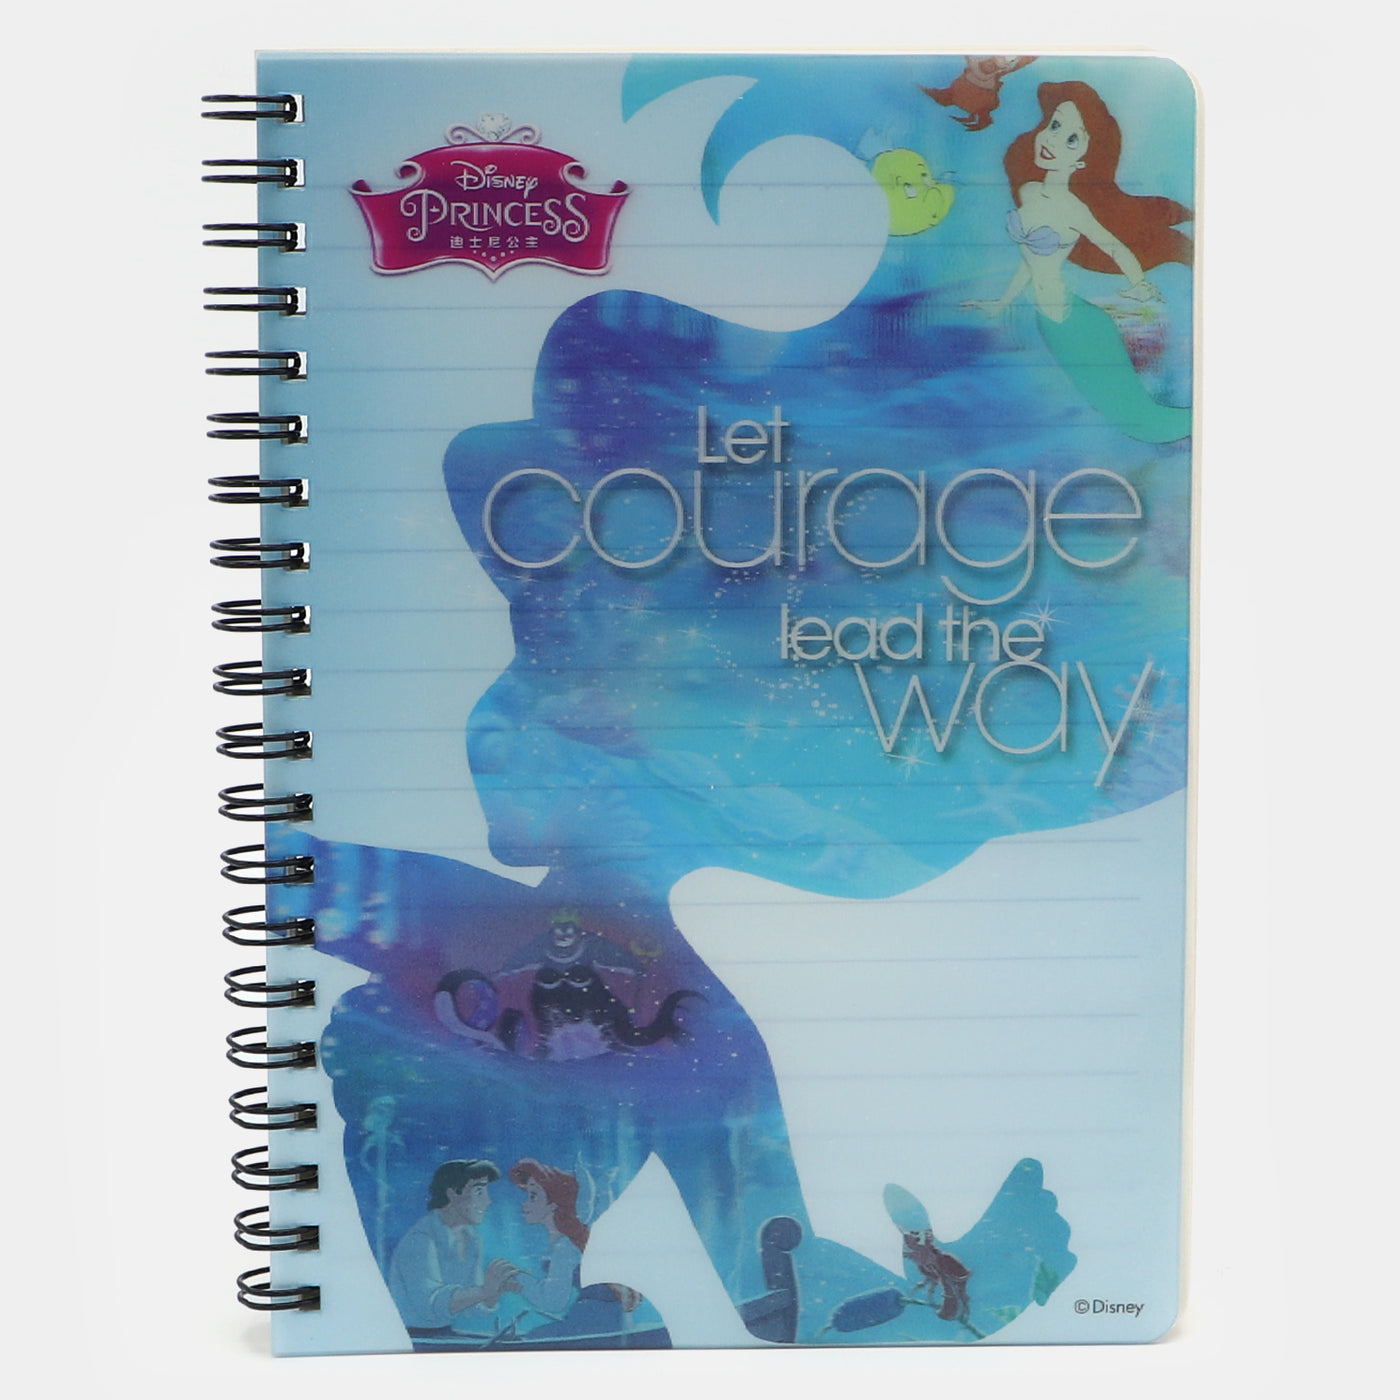 Cute 3D Character Note Book/Diary For Kids